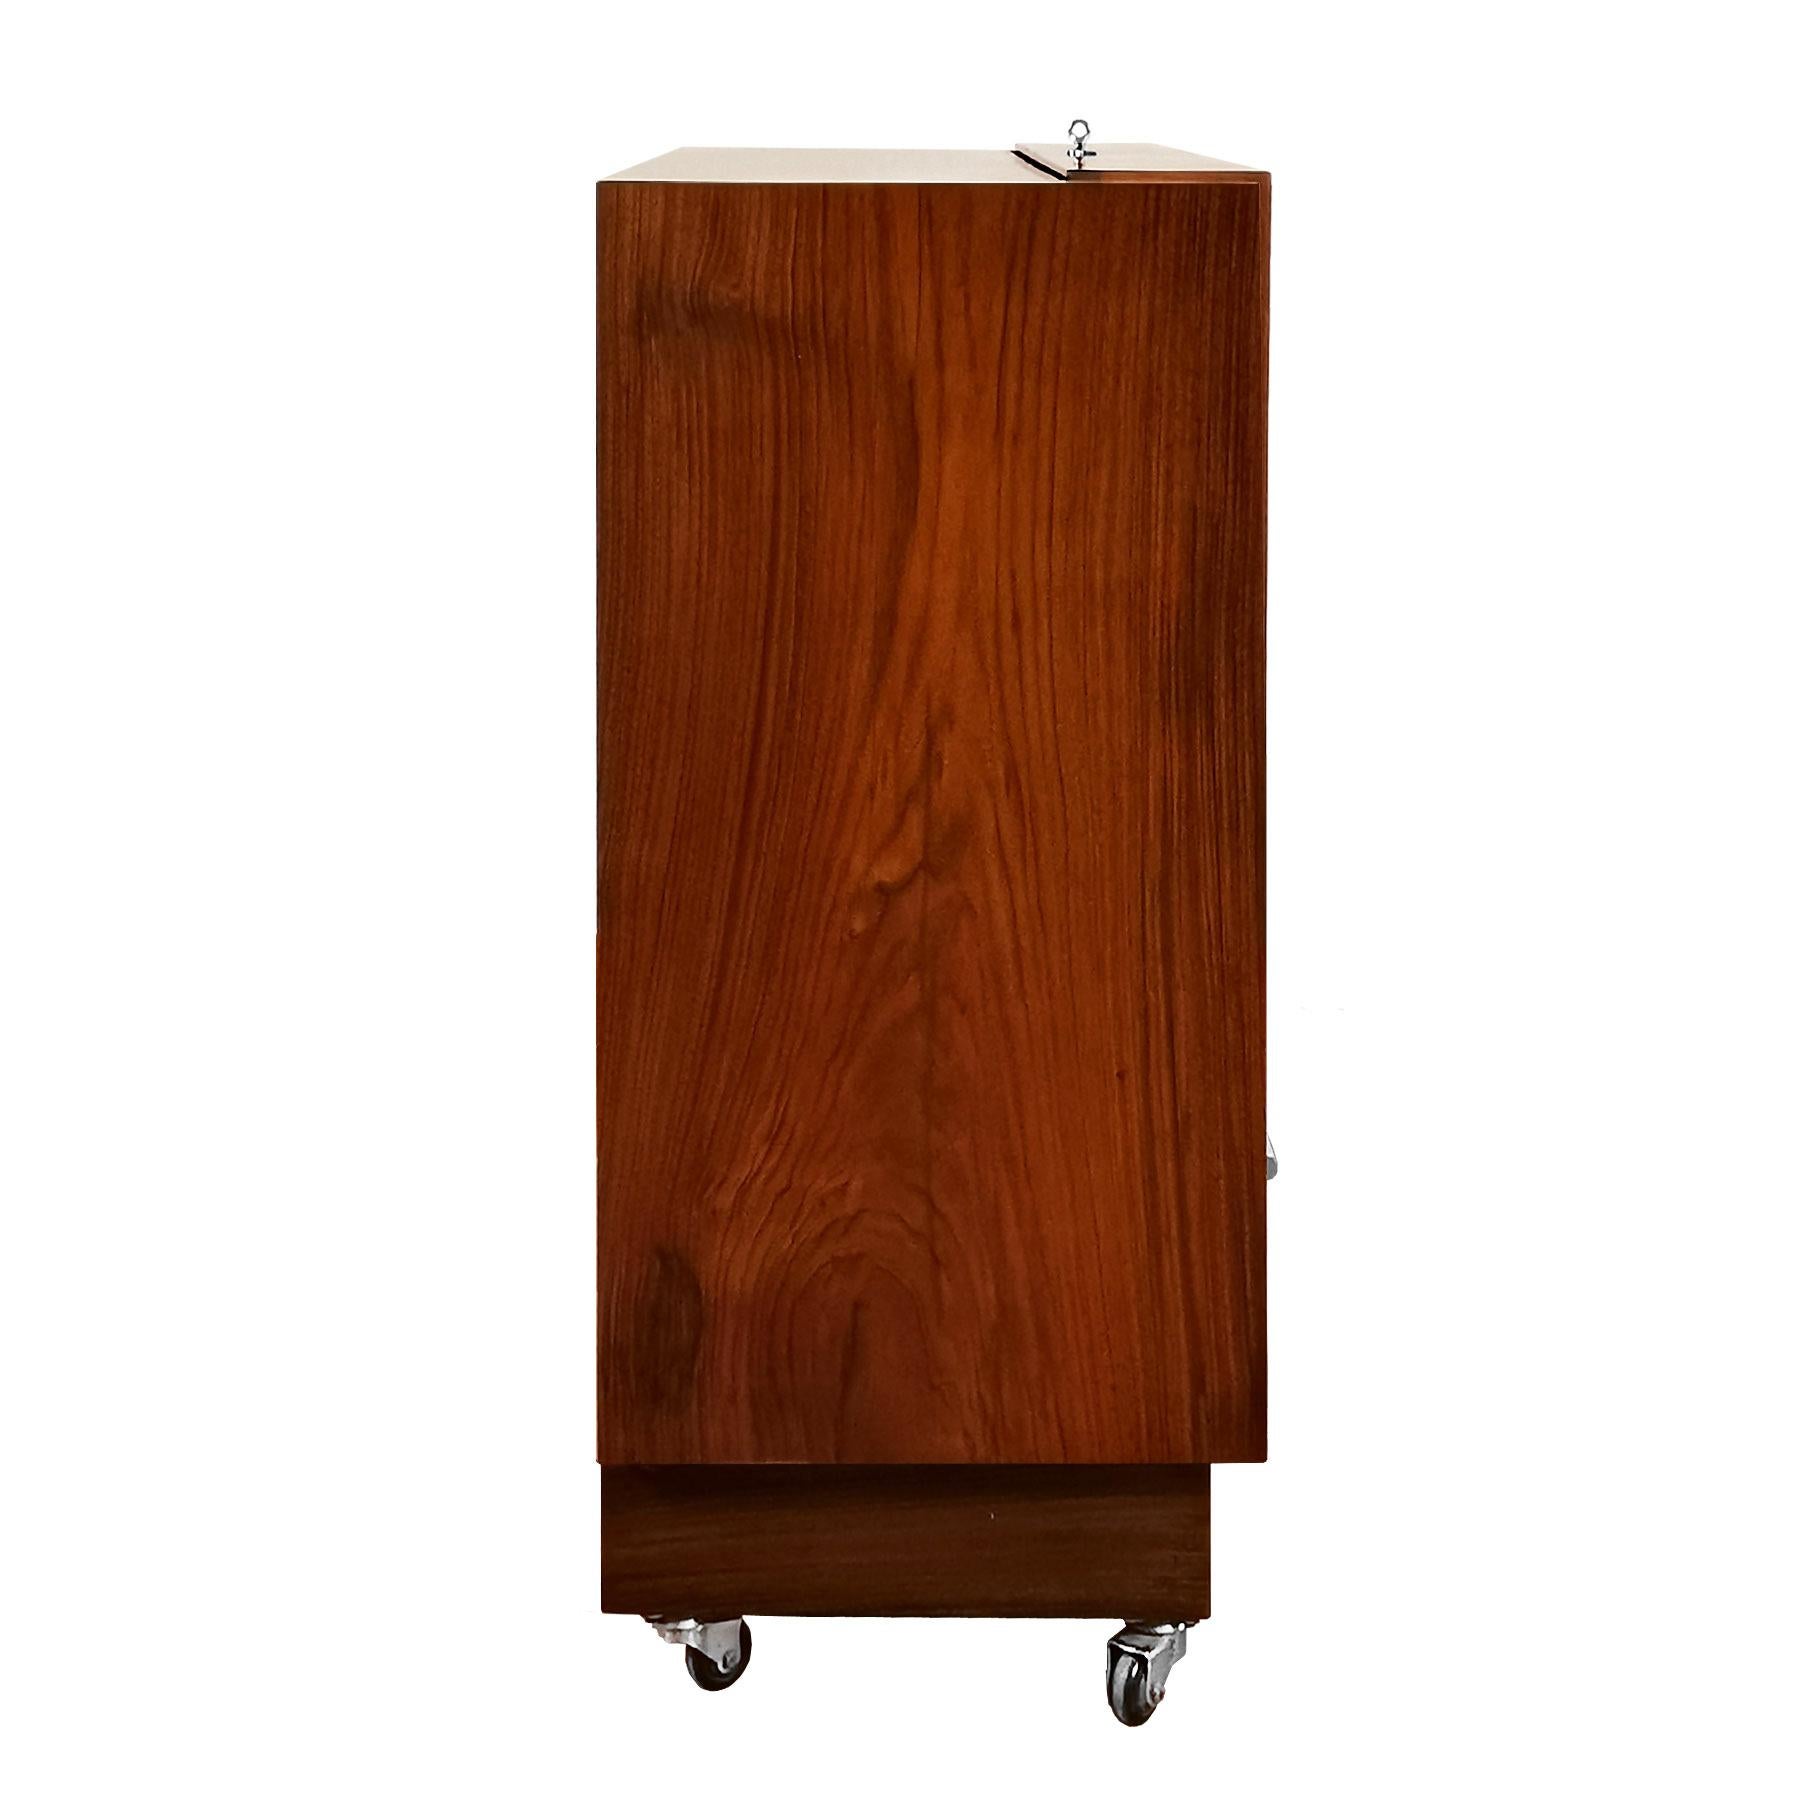 Mid-20th Century 1930s Art Deco Cubist Dry Bar, Walnut Veneer, Frosted Glass, Brass - Spain For Sale